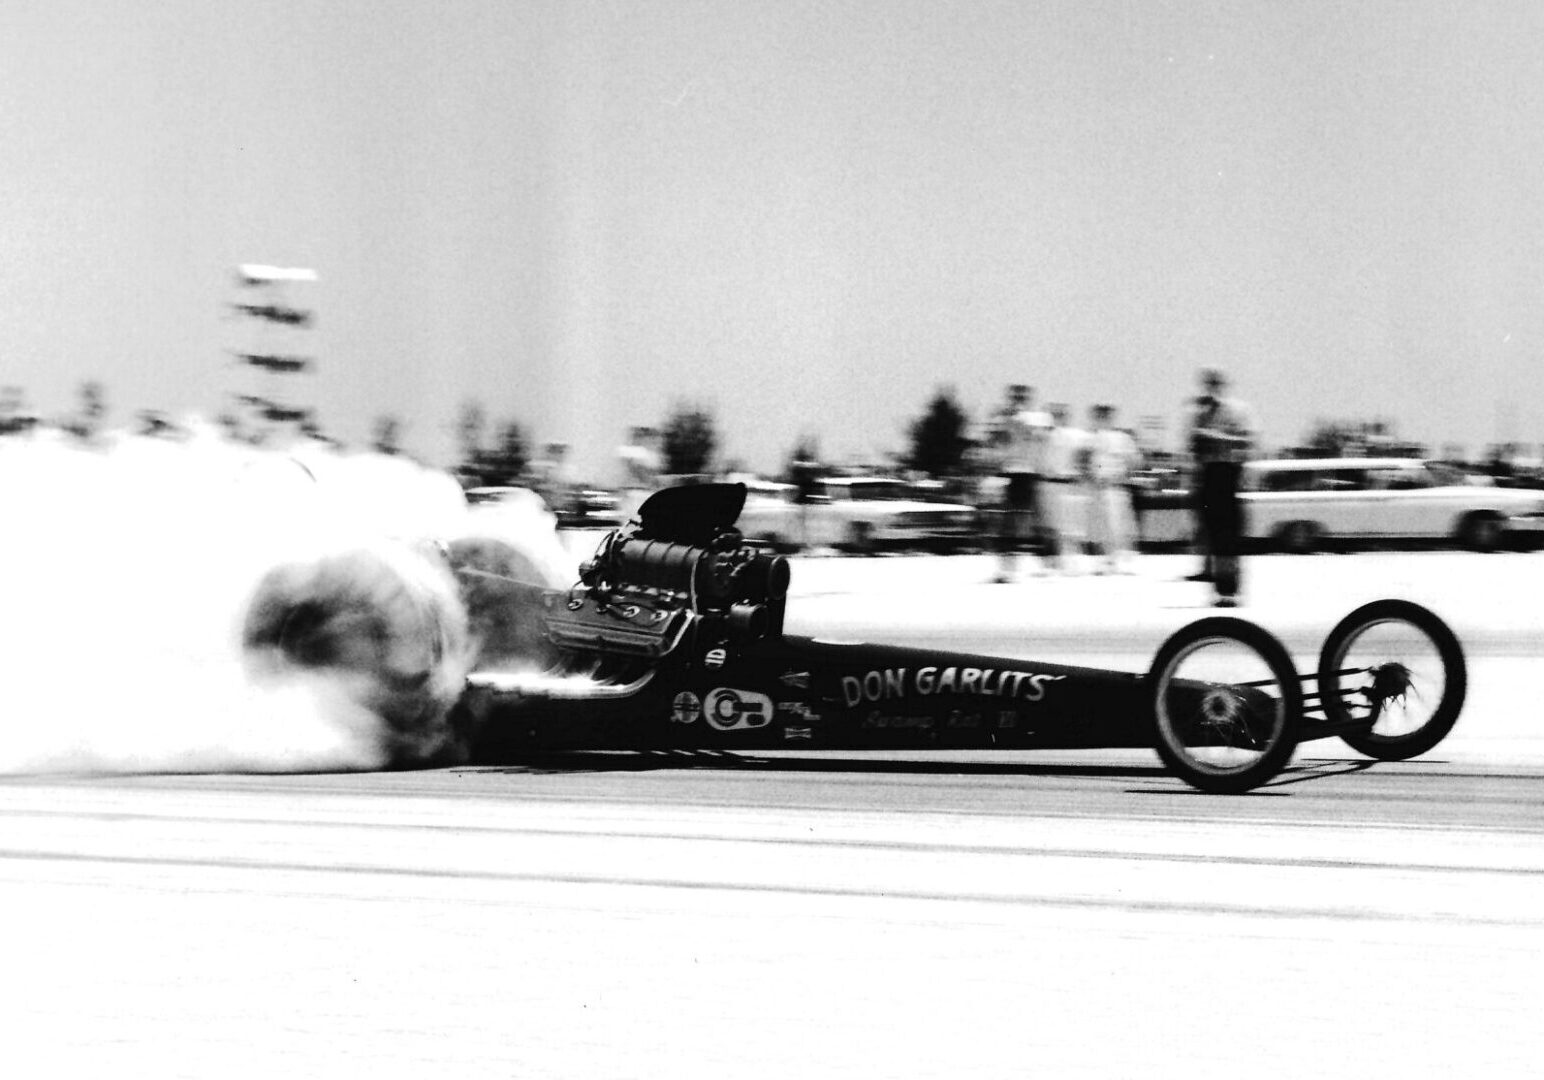 Built for Connie Swingle in the early 60’s this was one of the most beautiful dragsters to come out of Garlits Automotive Inc. In 1964, during a match race at US-30 Dragstrip in Gary Indiana, Swingle flipped Swamp Rat VII. Swamp Rat VII had a top speed of 201.88 MPH and an ET of 8.01 seconds. 